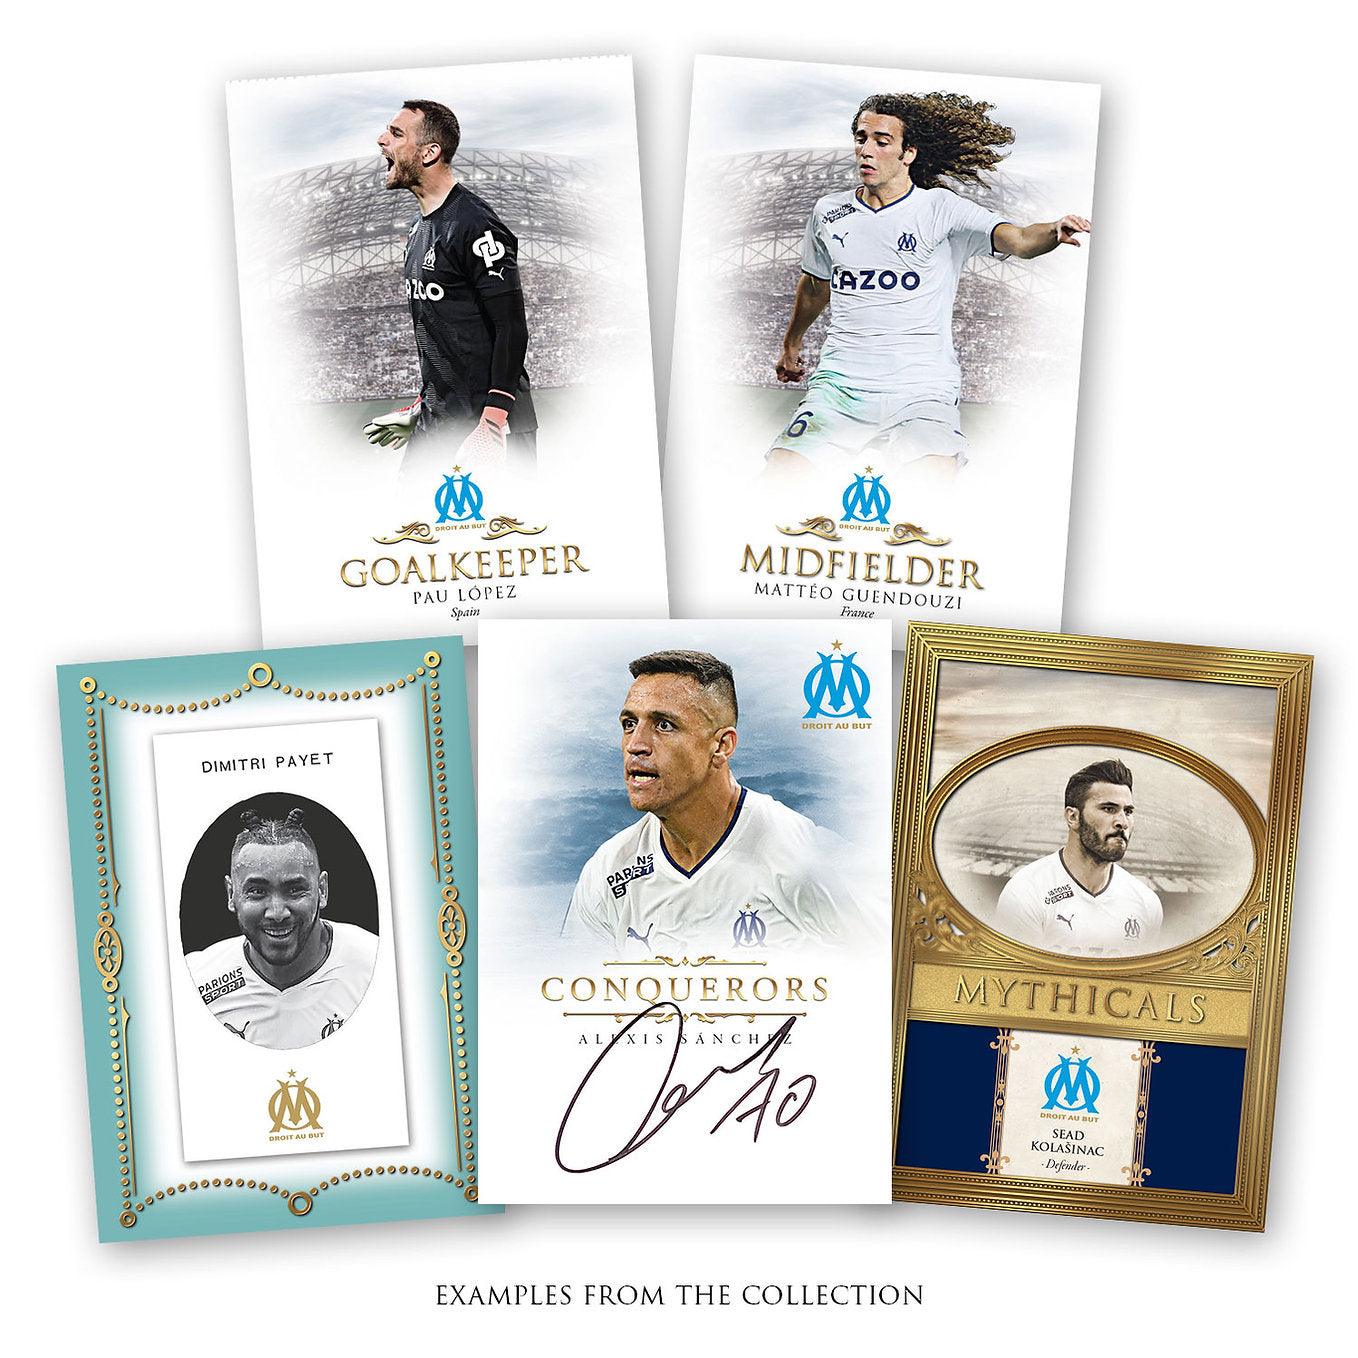 Futera - 2022/23 Olympique de Marseille Football Club Collection - Pack - The Card Vault